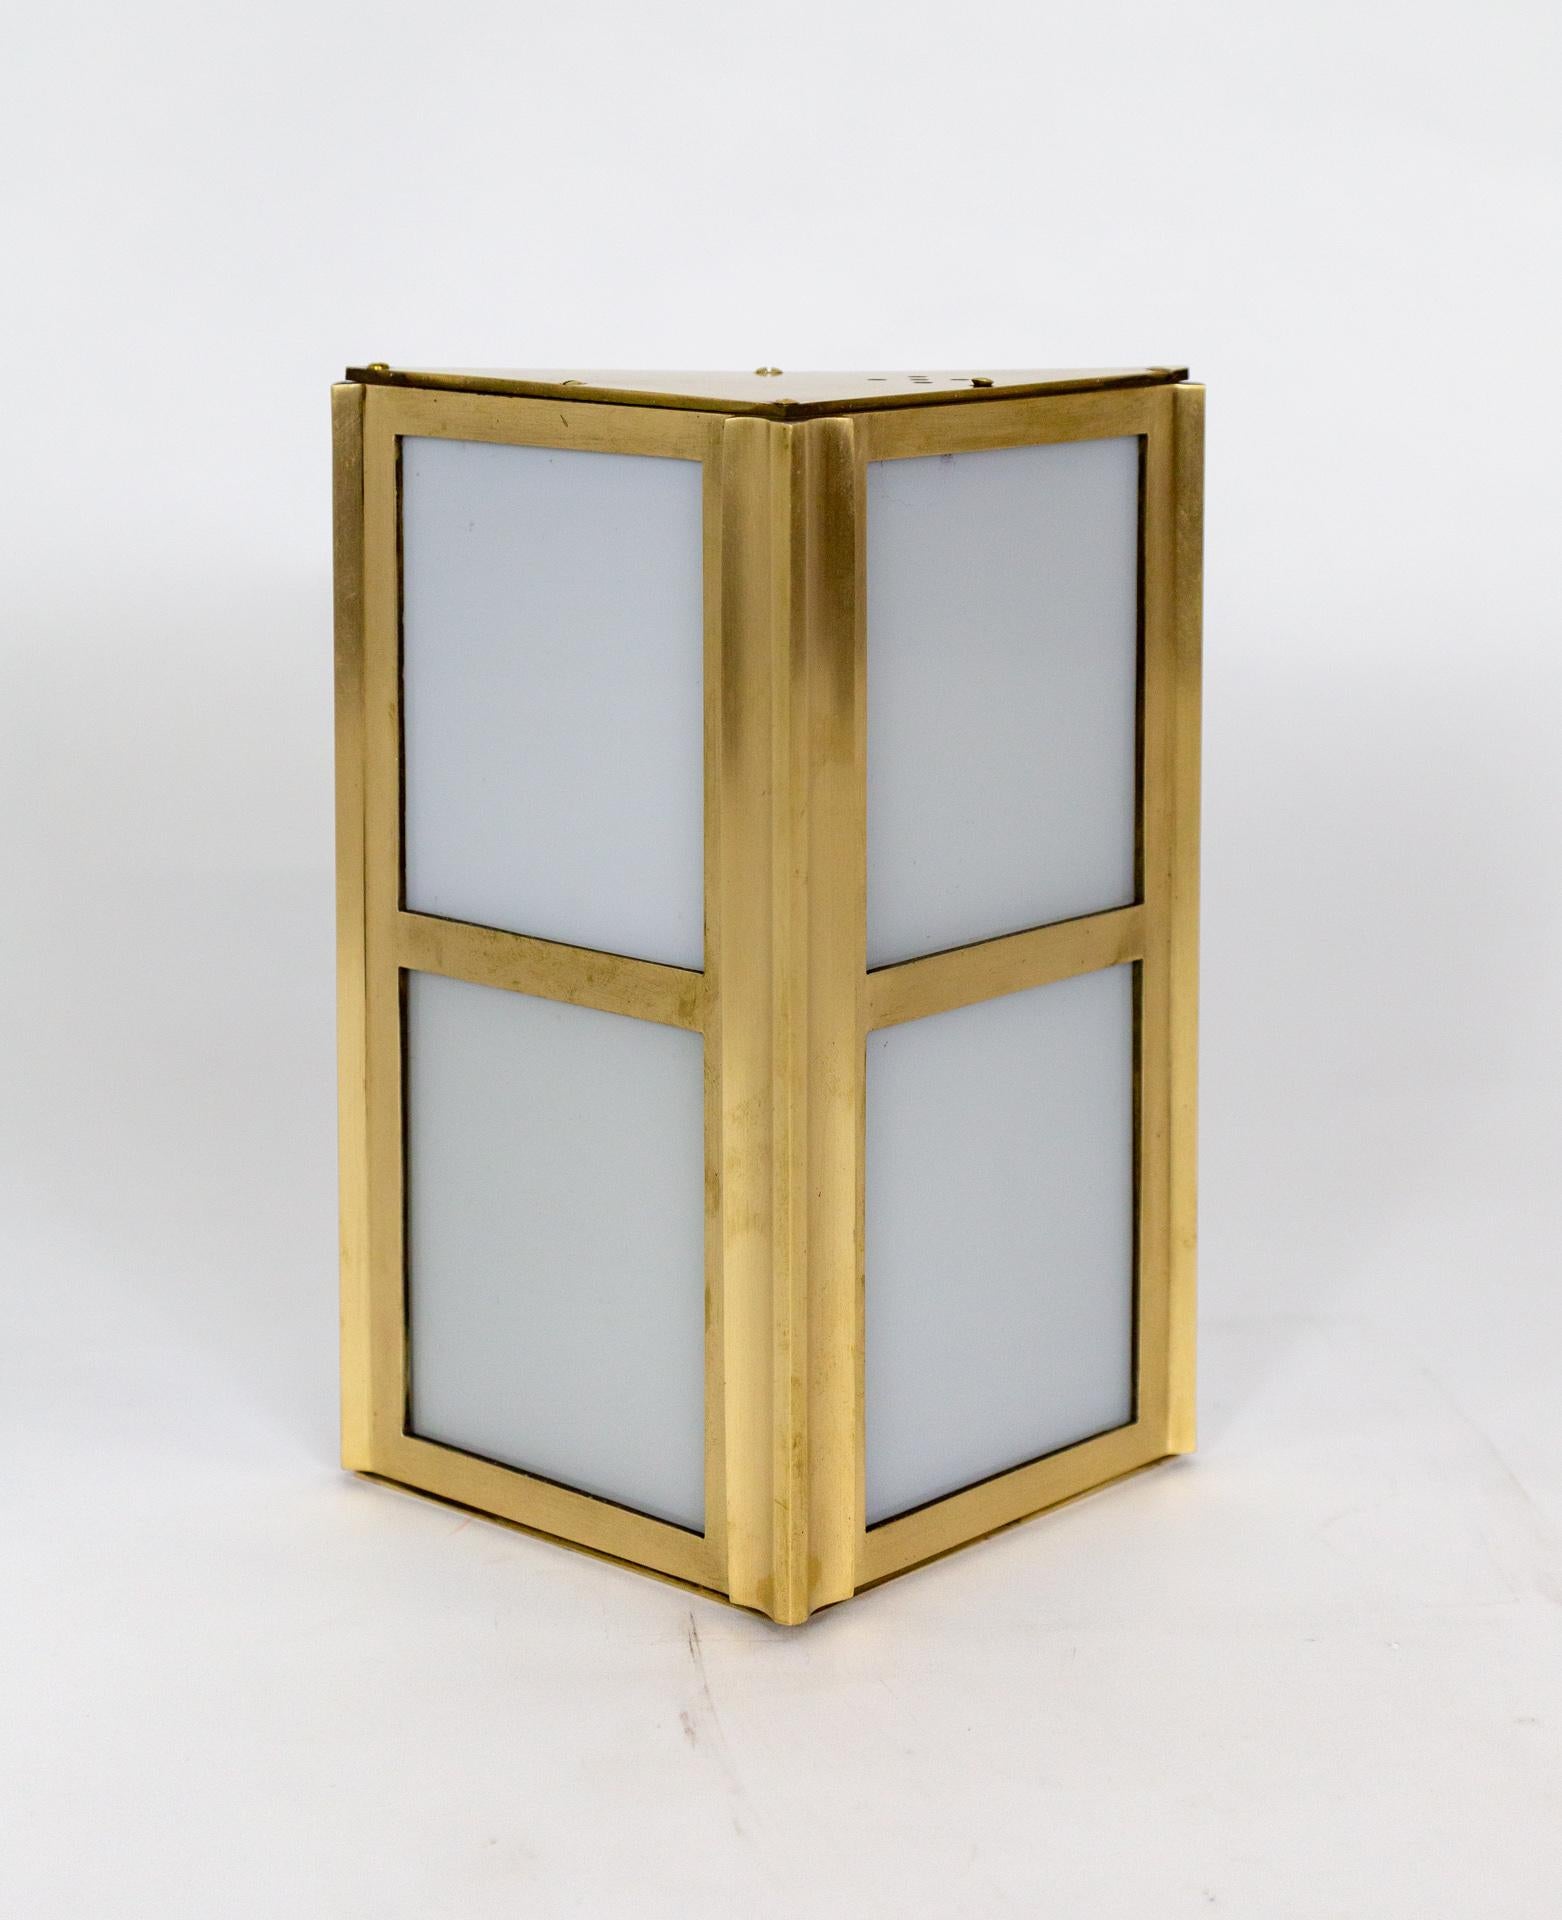 These finely crafted sconces are refashioned from elevator lights from the 1930s.  The heavy, solid brass frame has two rectangular faces divided into 4 windows with original white glass.   Creates an even, diffused light.  Each sconce has two